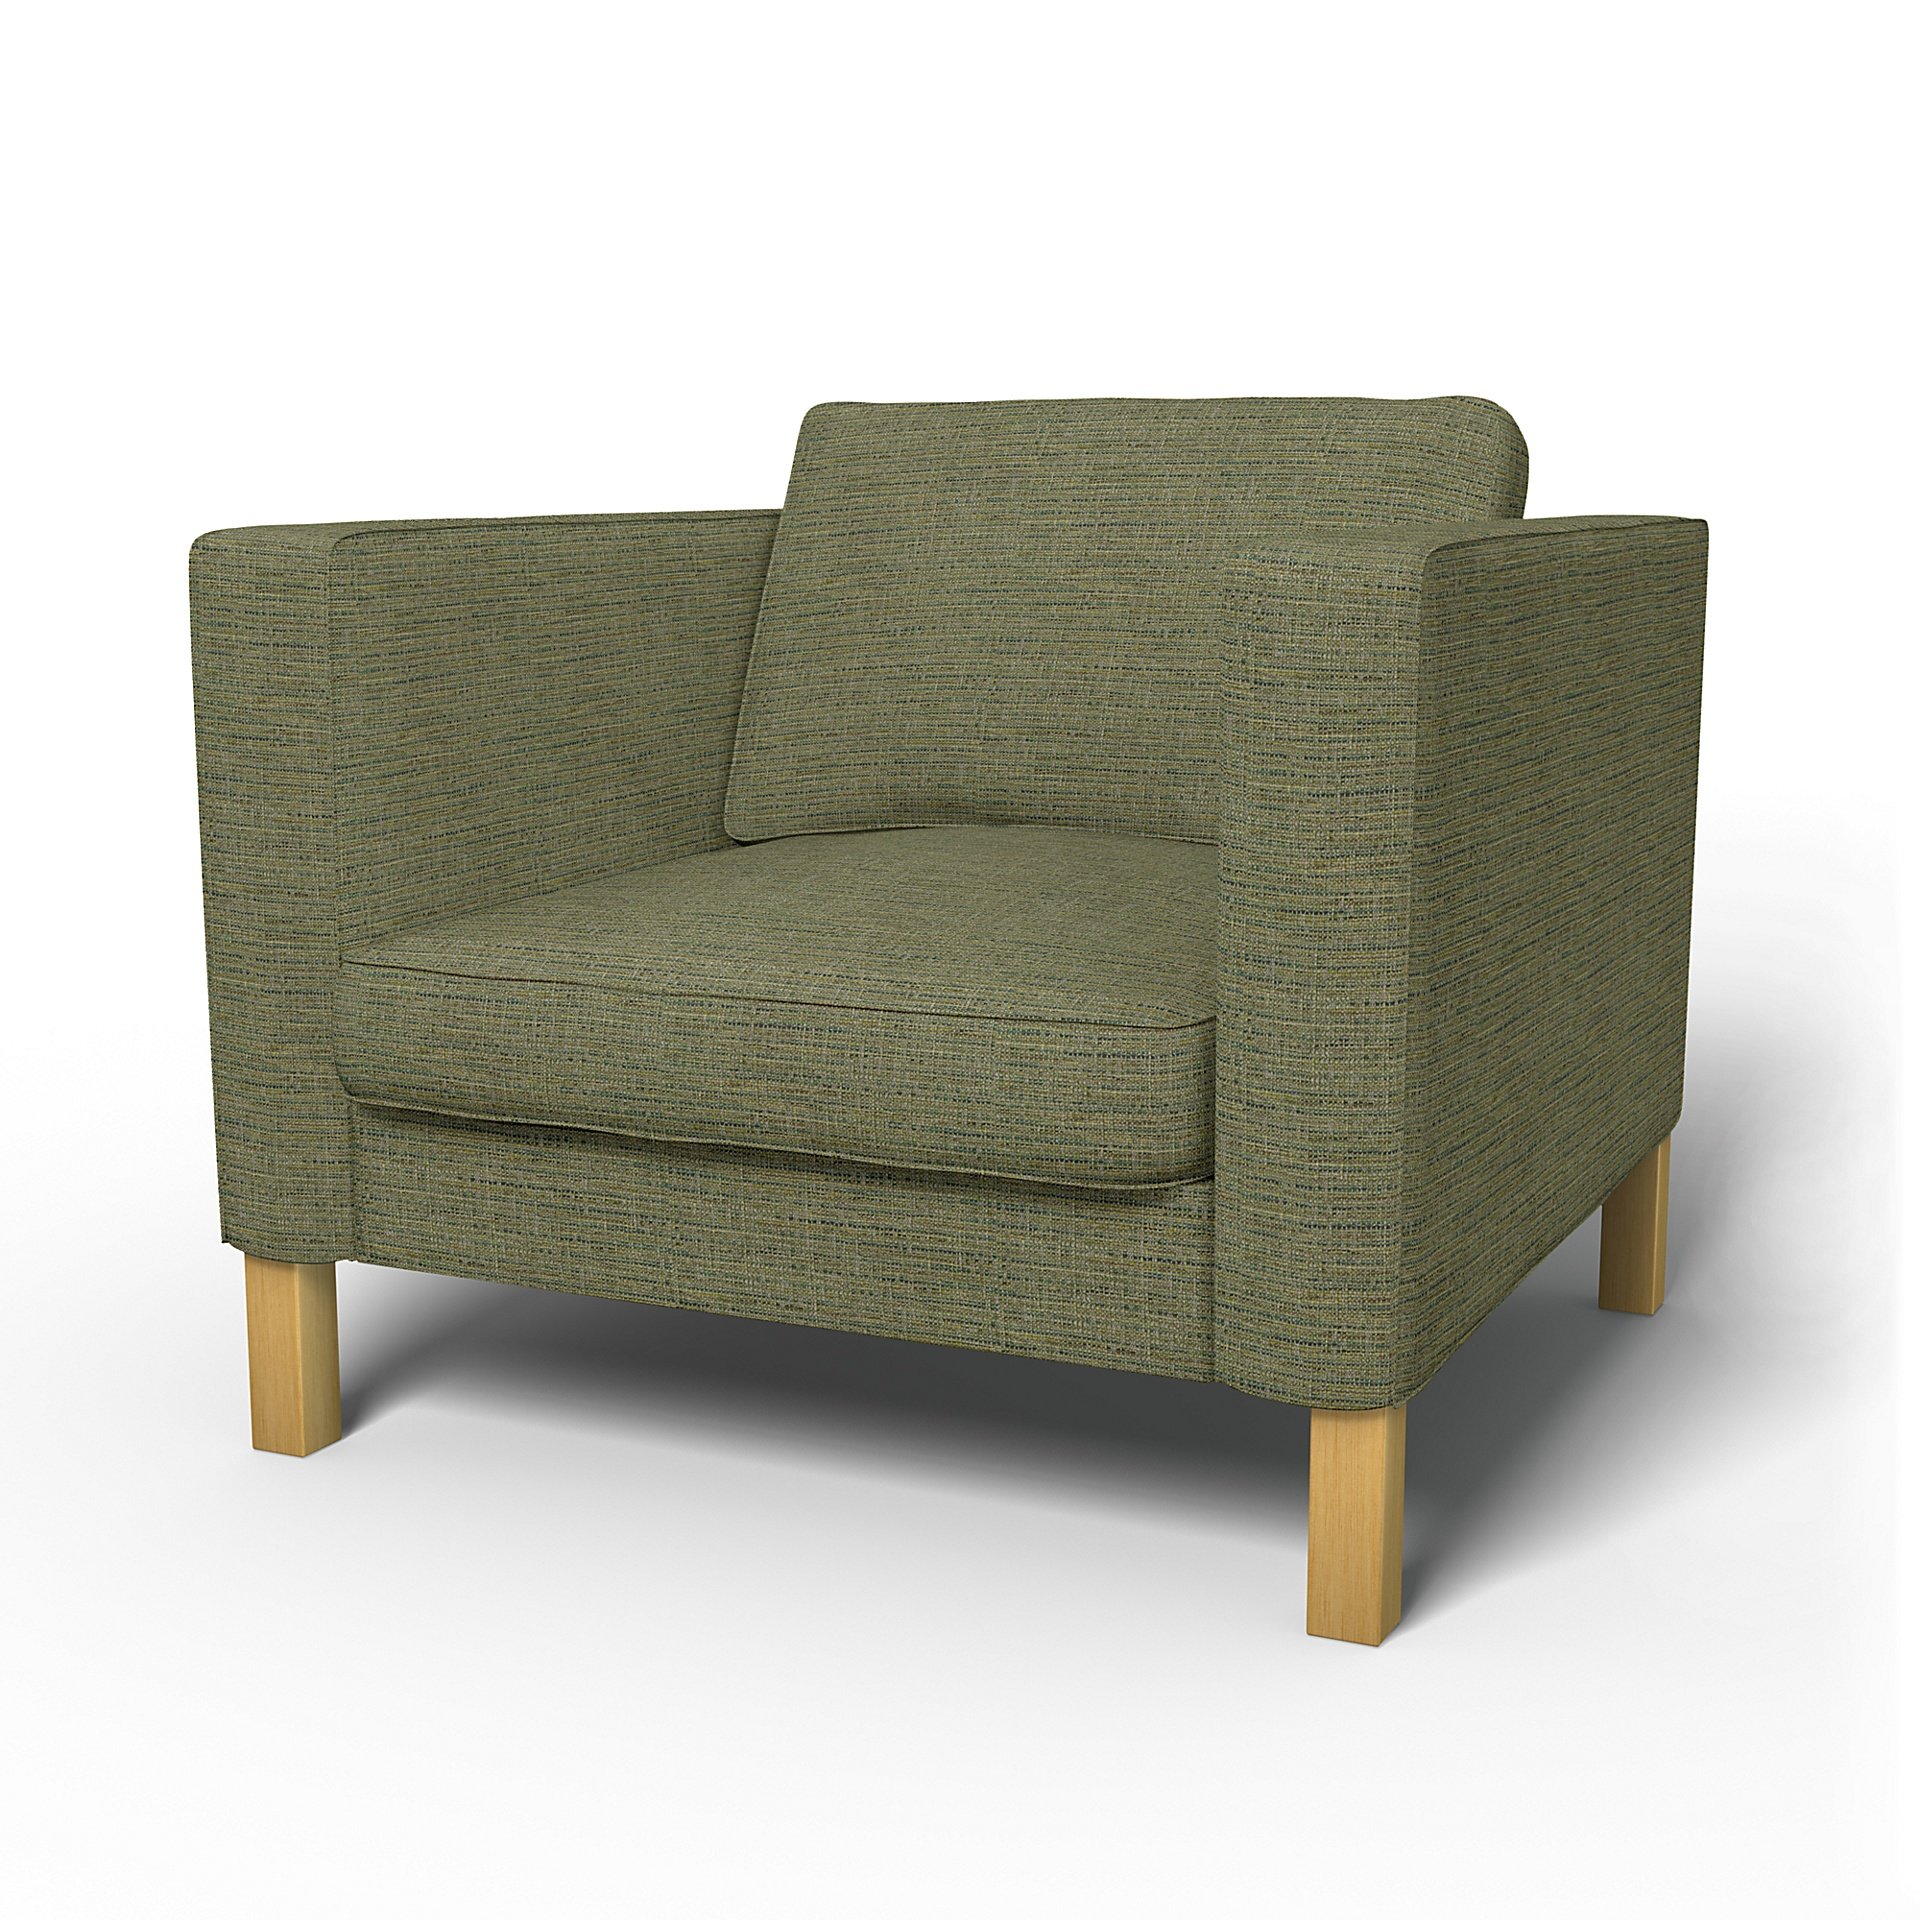 IKEA - Karlstad Armchair Cover (Large model), Meadow Green, Boucle & Texture - Bemz